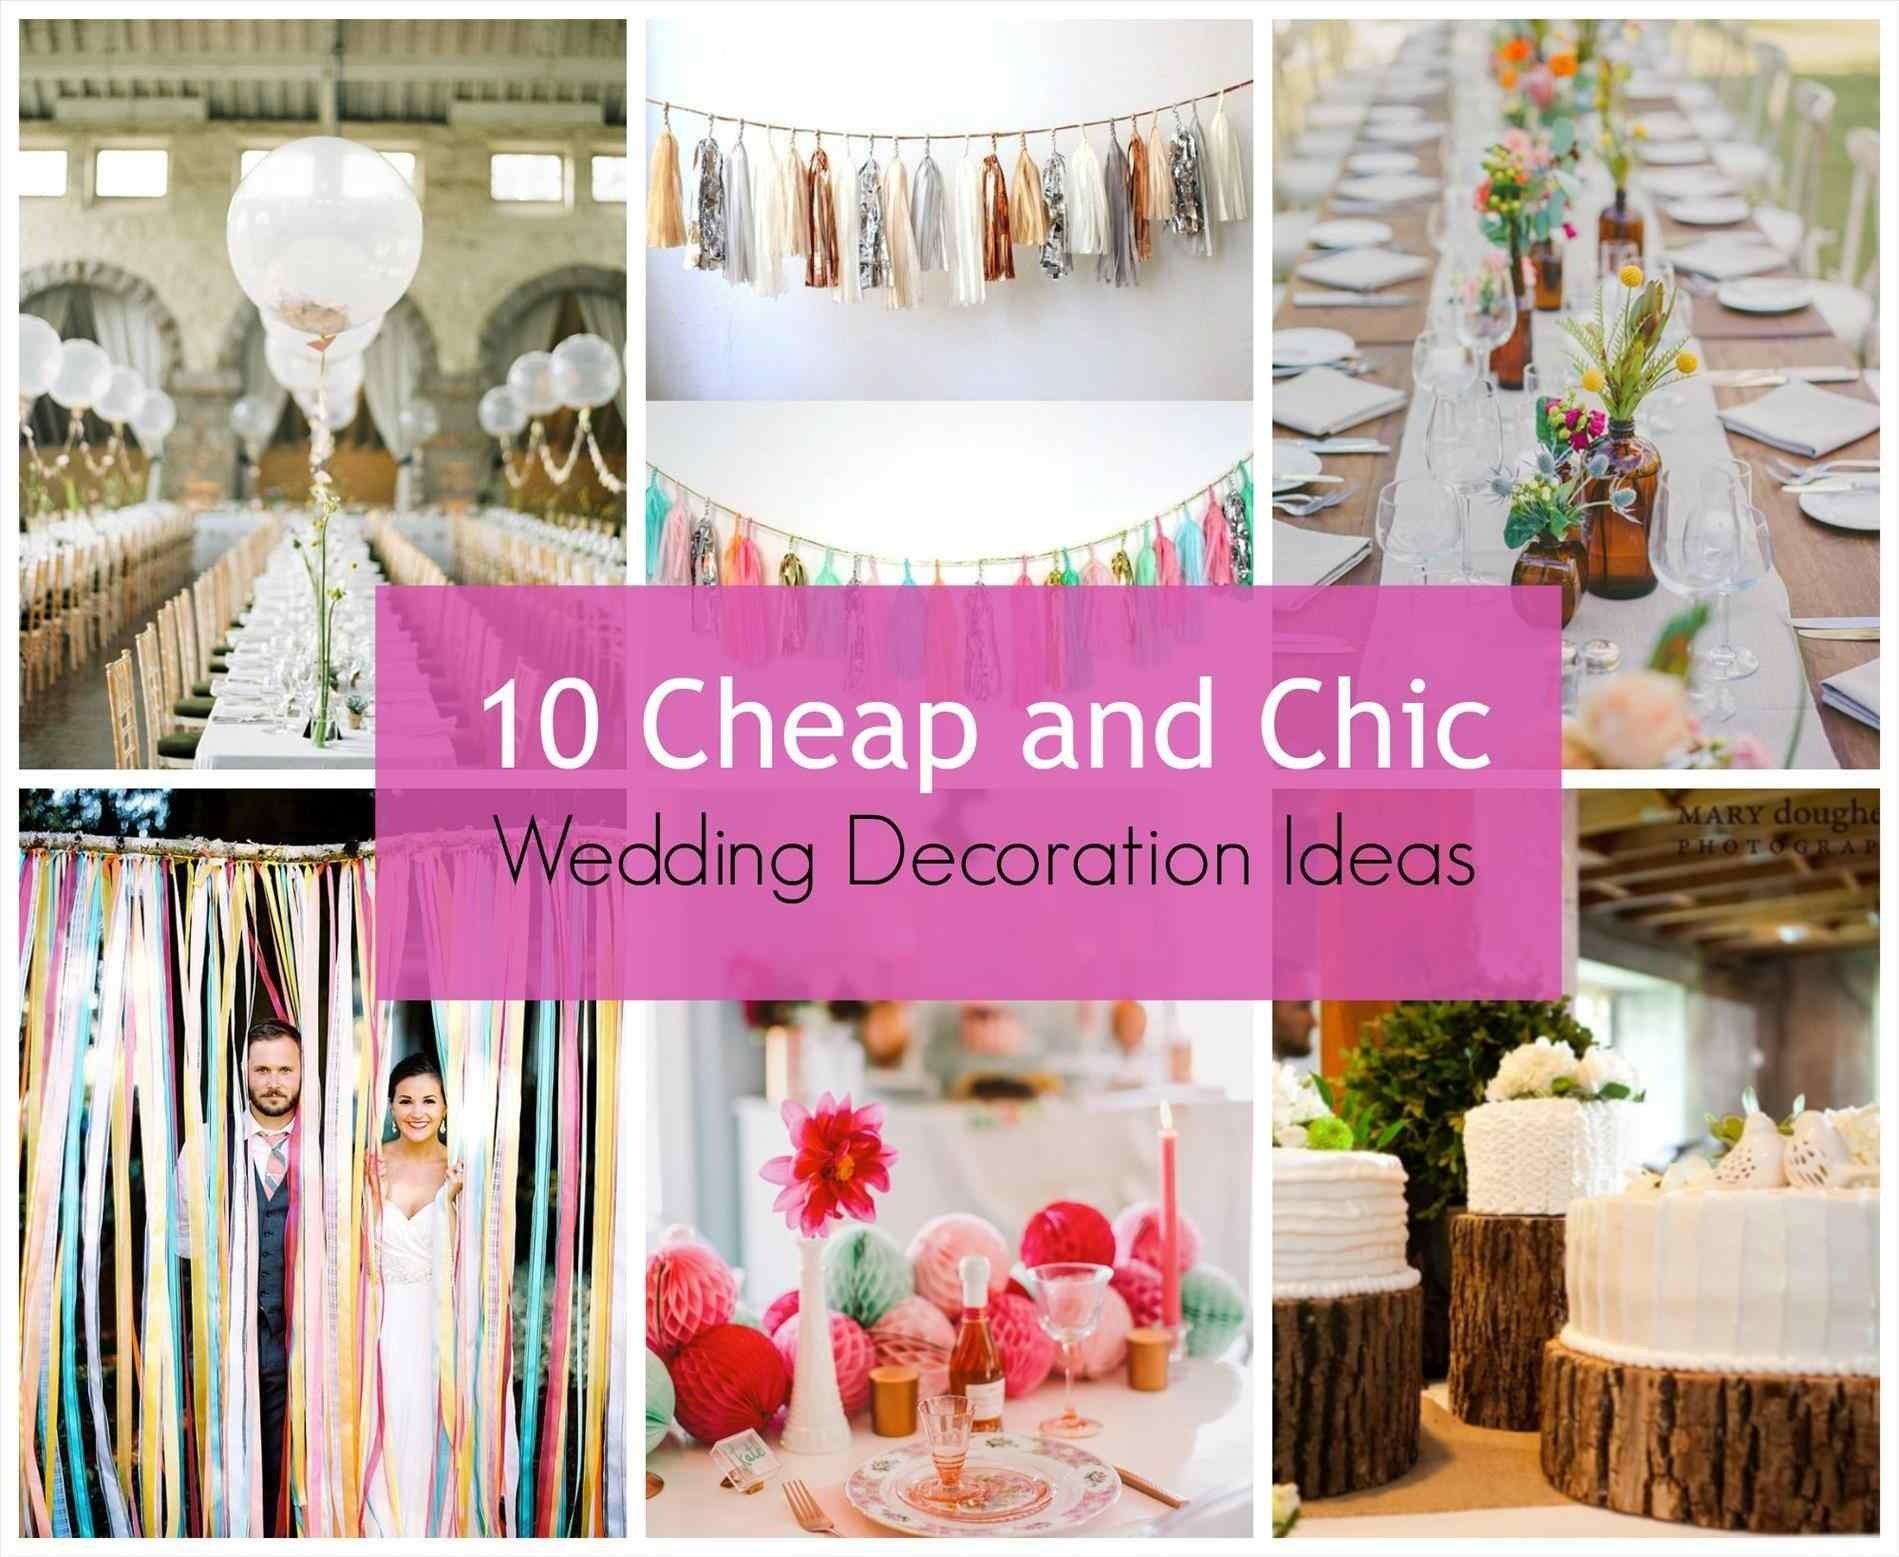 10 Nice Wedding Ideas For Spring On A Budget chic decorti stylehunter wedding ideas for spring on a budget 2022